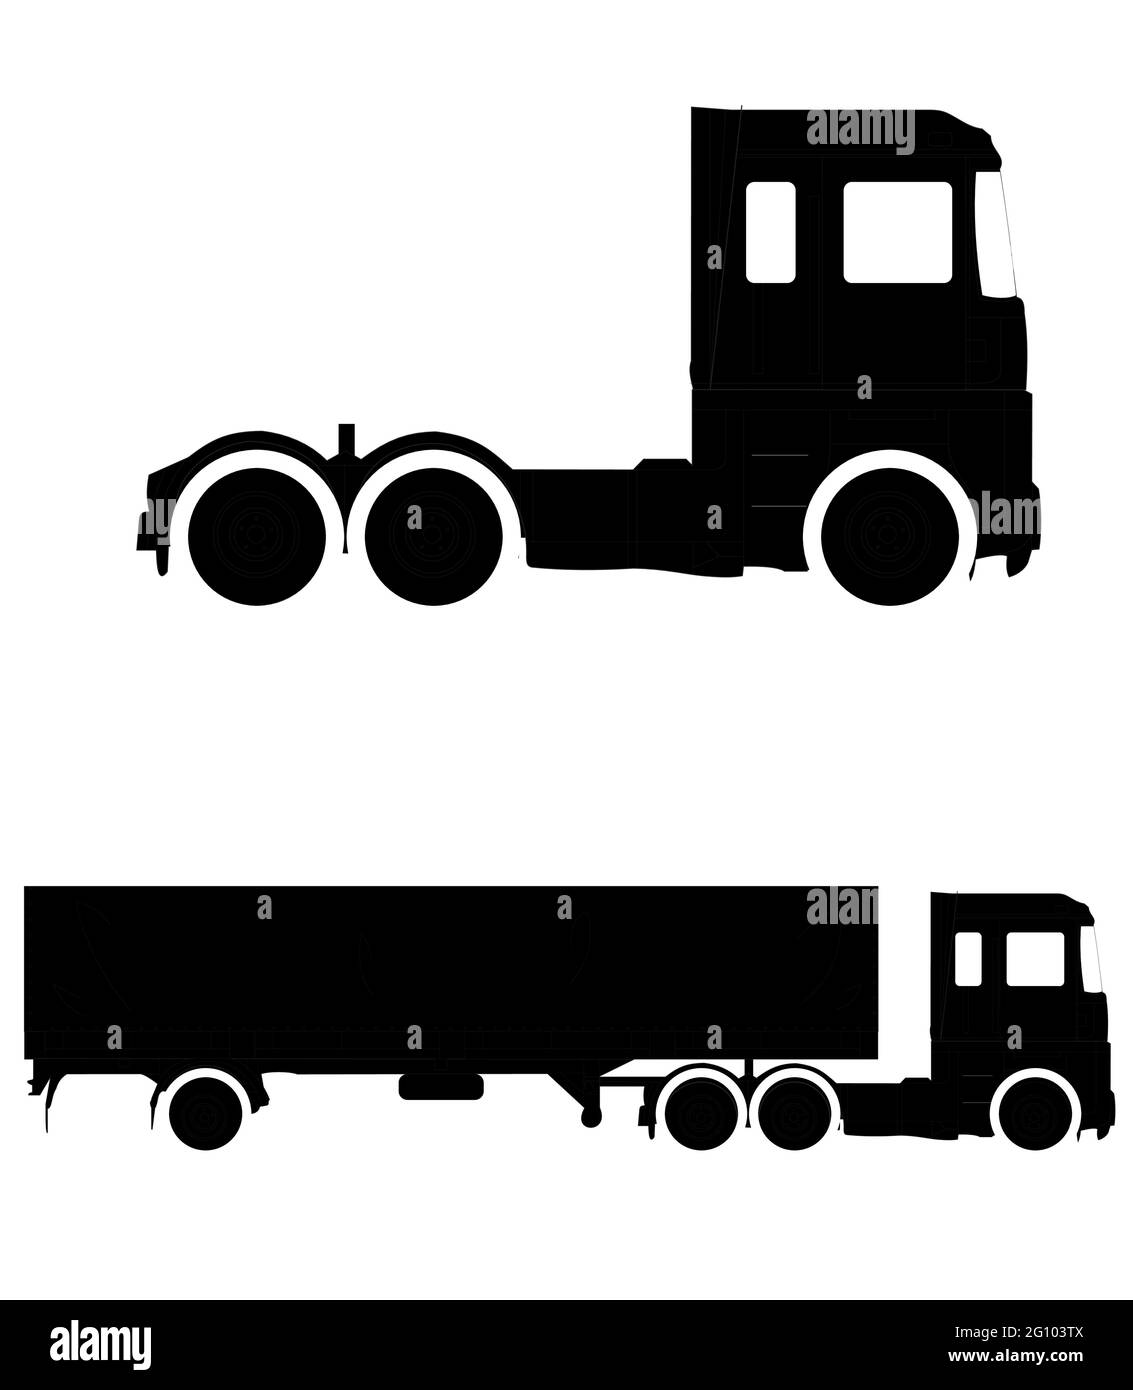 Black on white lorry , truck with lorry illustration vector Stock Vector